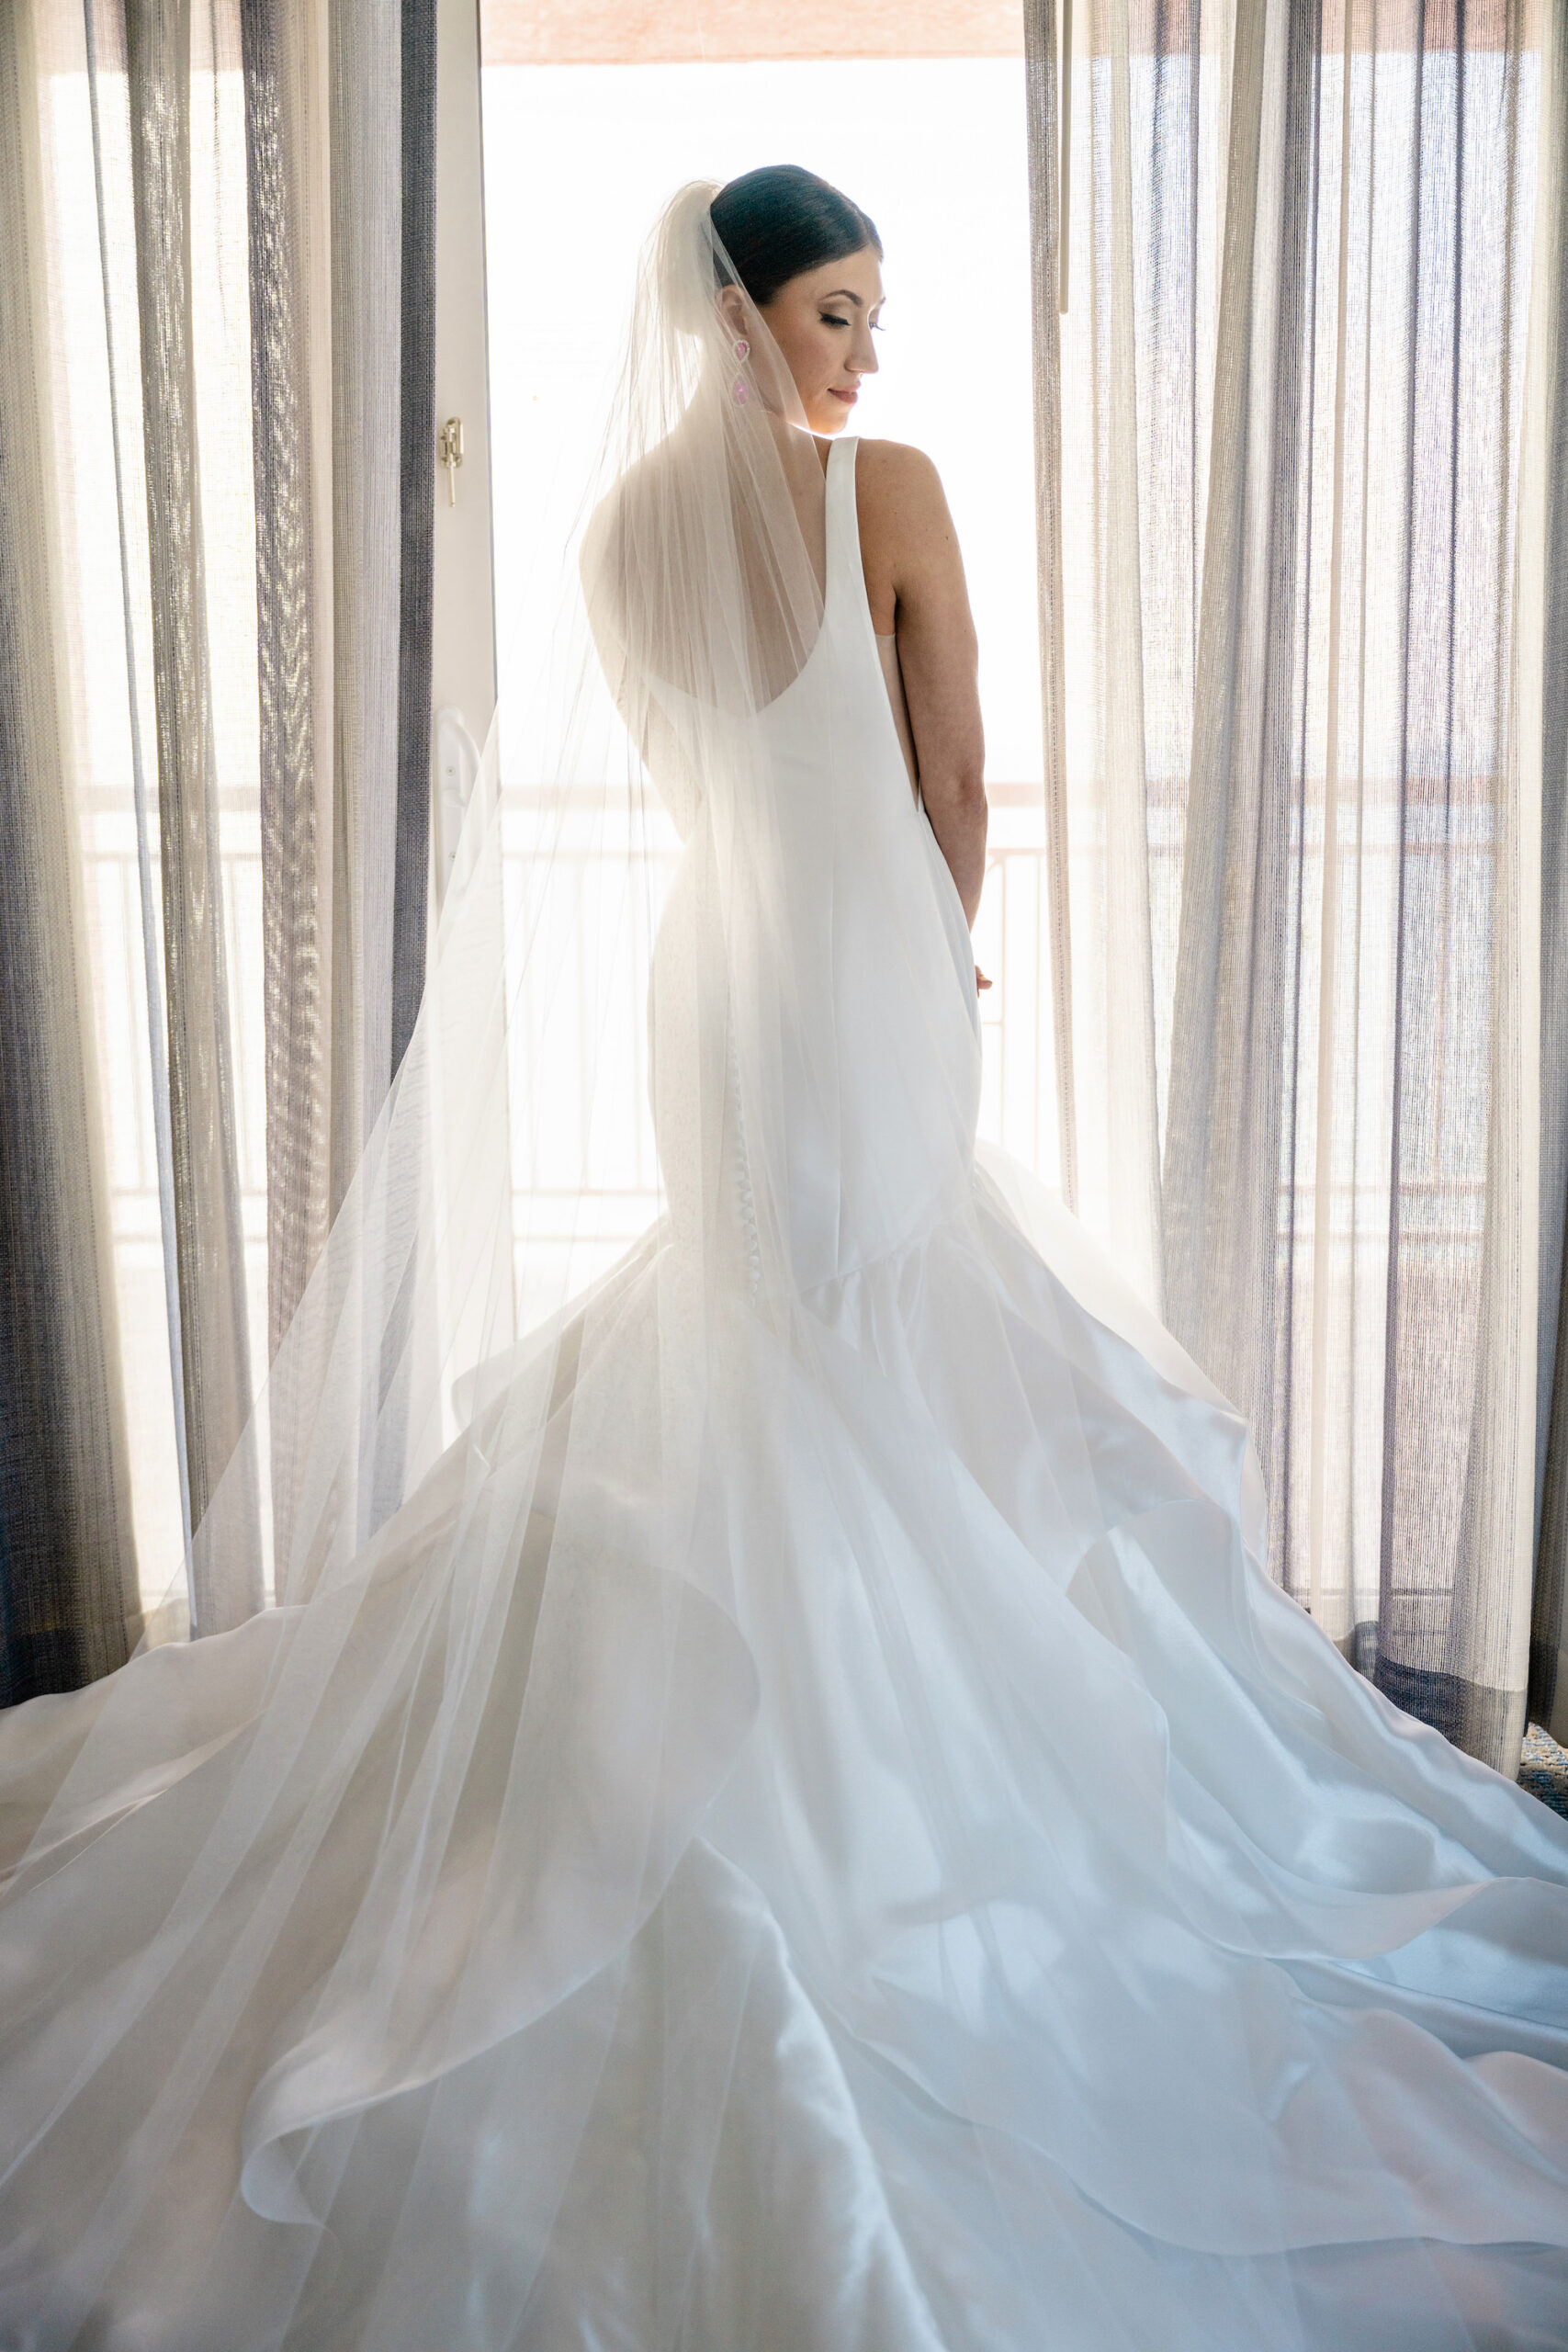 Ivory Plunging Neckline Mermaid Wedding Dress Ideas | Tampa Bay Boutique Truly Forever Bridal